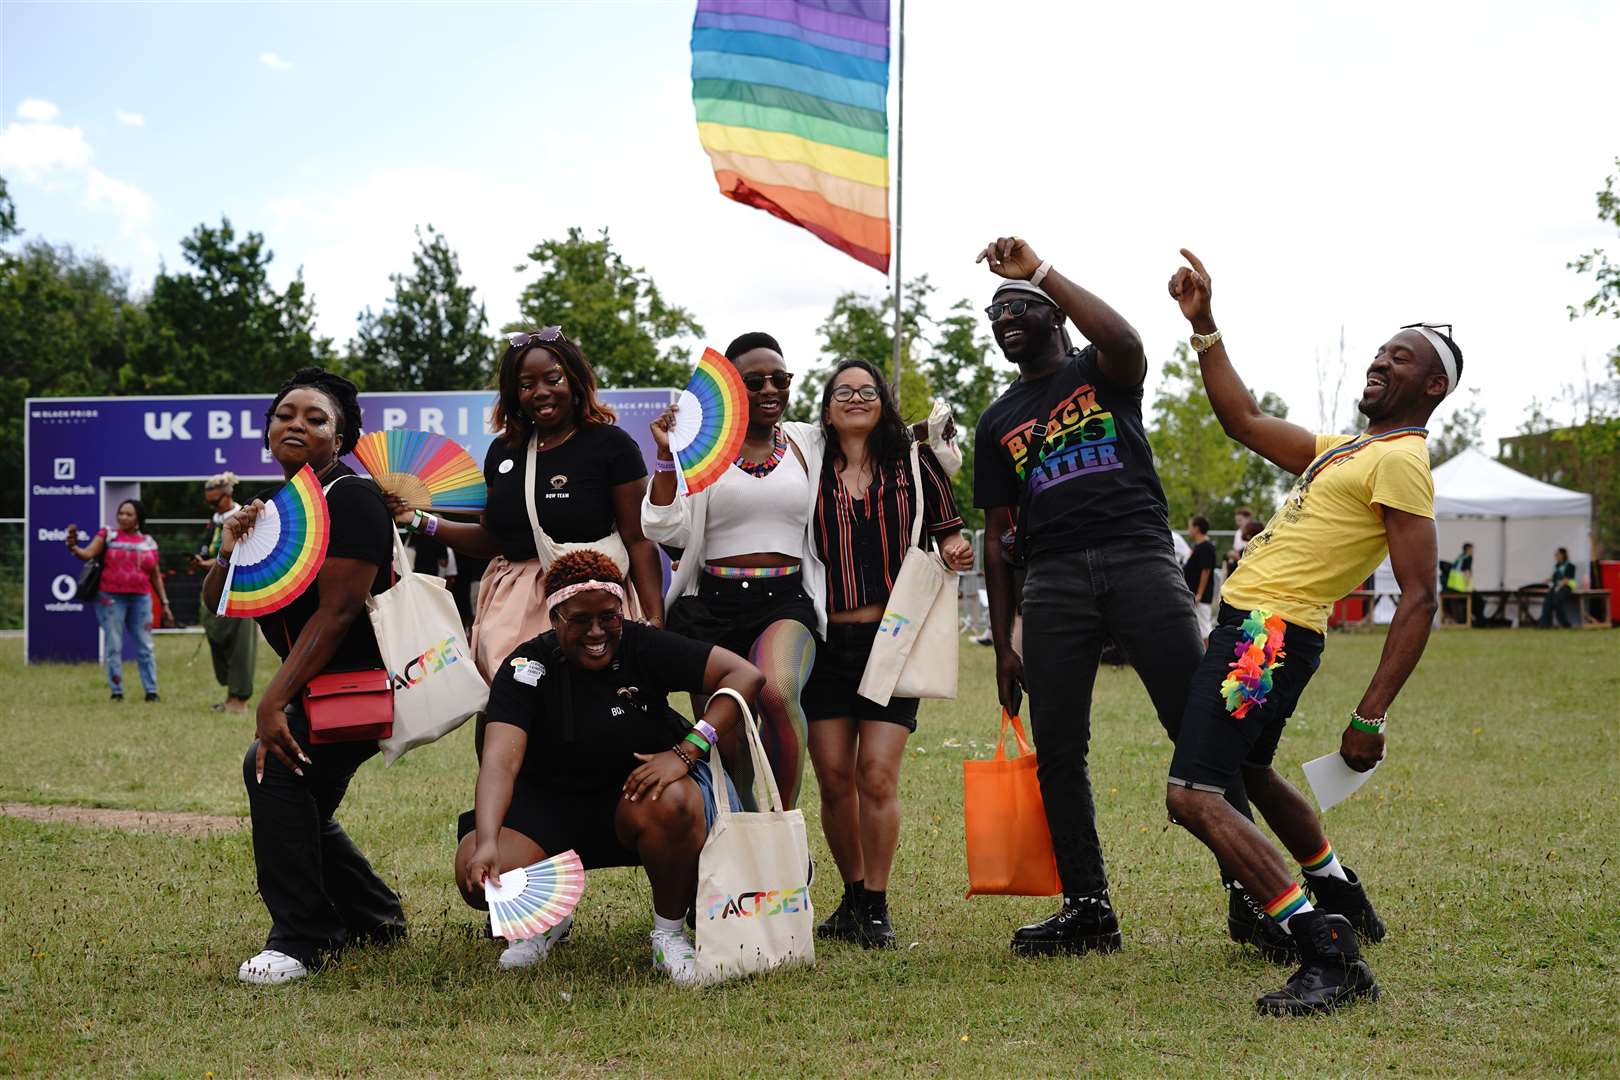 Revellers at UK Black Pride at the Queen Elizabeth Olympic Park in east London (Lucy North/PA)